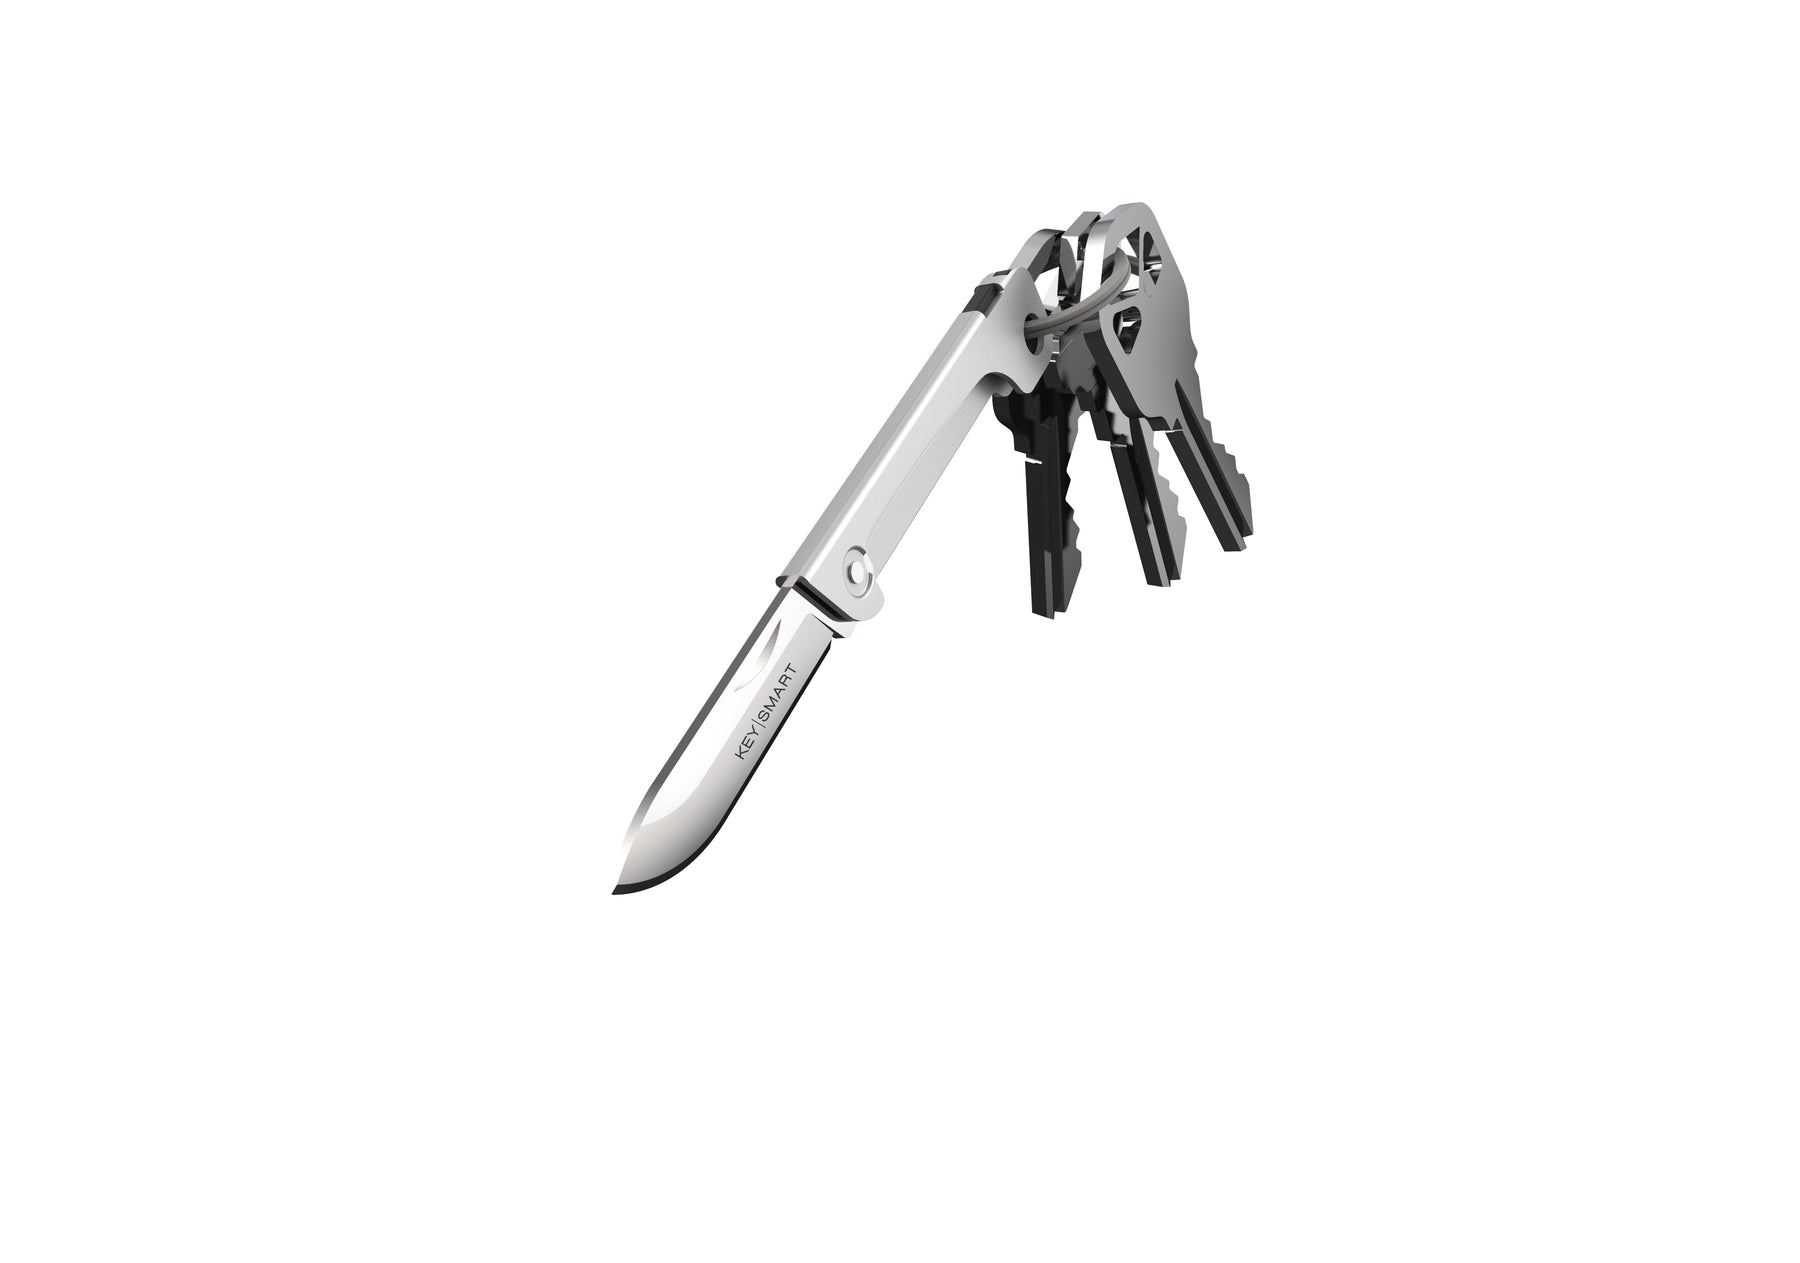 KeySmart Mini Knife - Keychain Pocket Knife, Compact Folding BOC Cutter  with Stainless Steel, Add-On Accessory (Silver) 